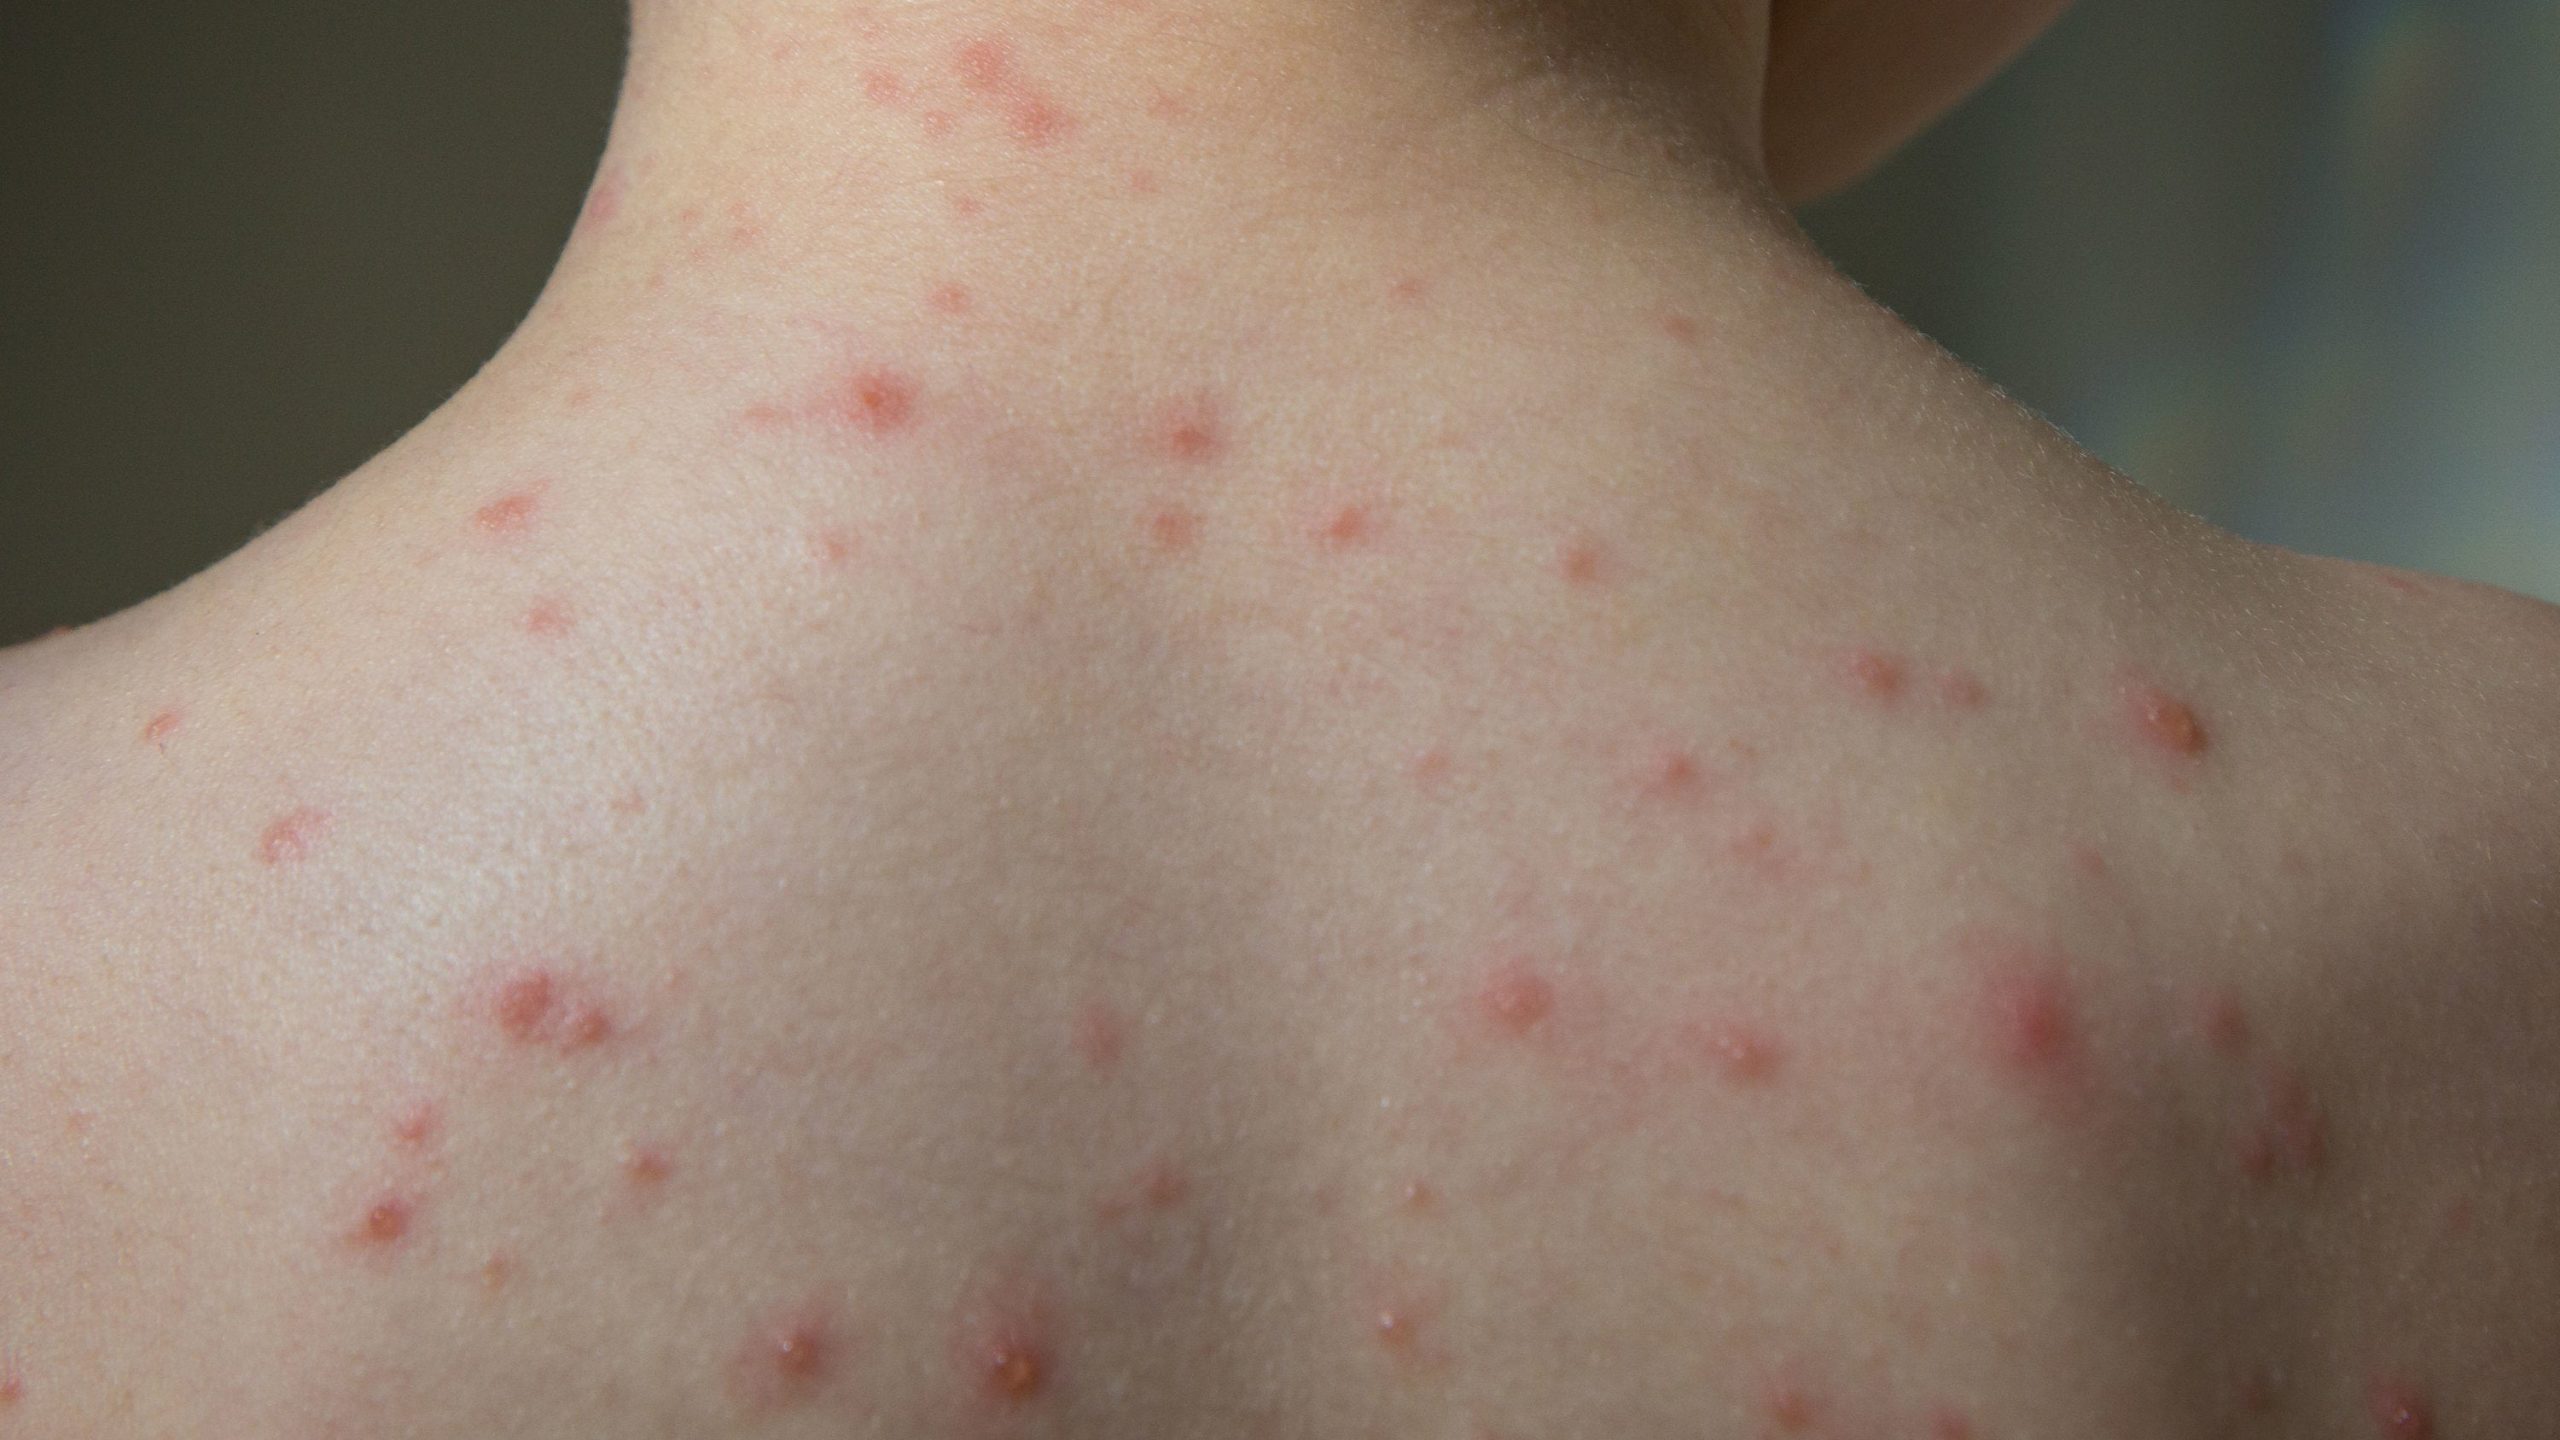 Chickenpox Outbreak at School Linked to Vaccine Exemptions